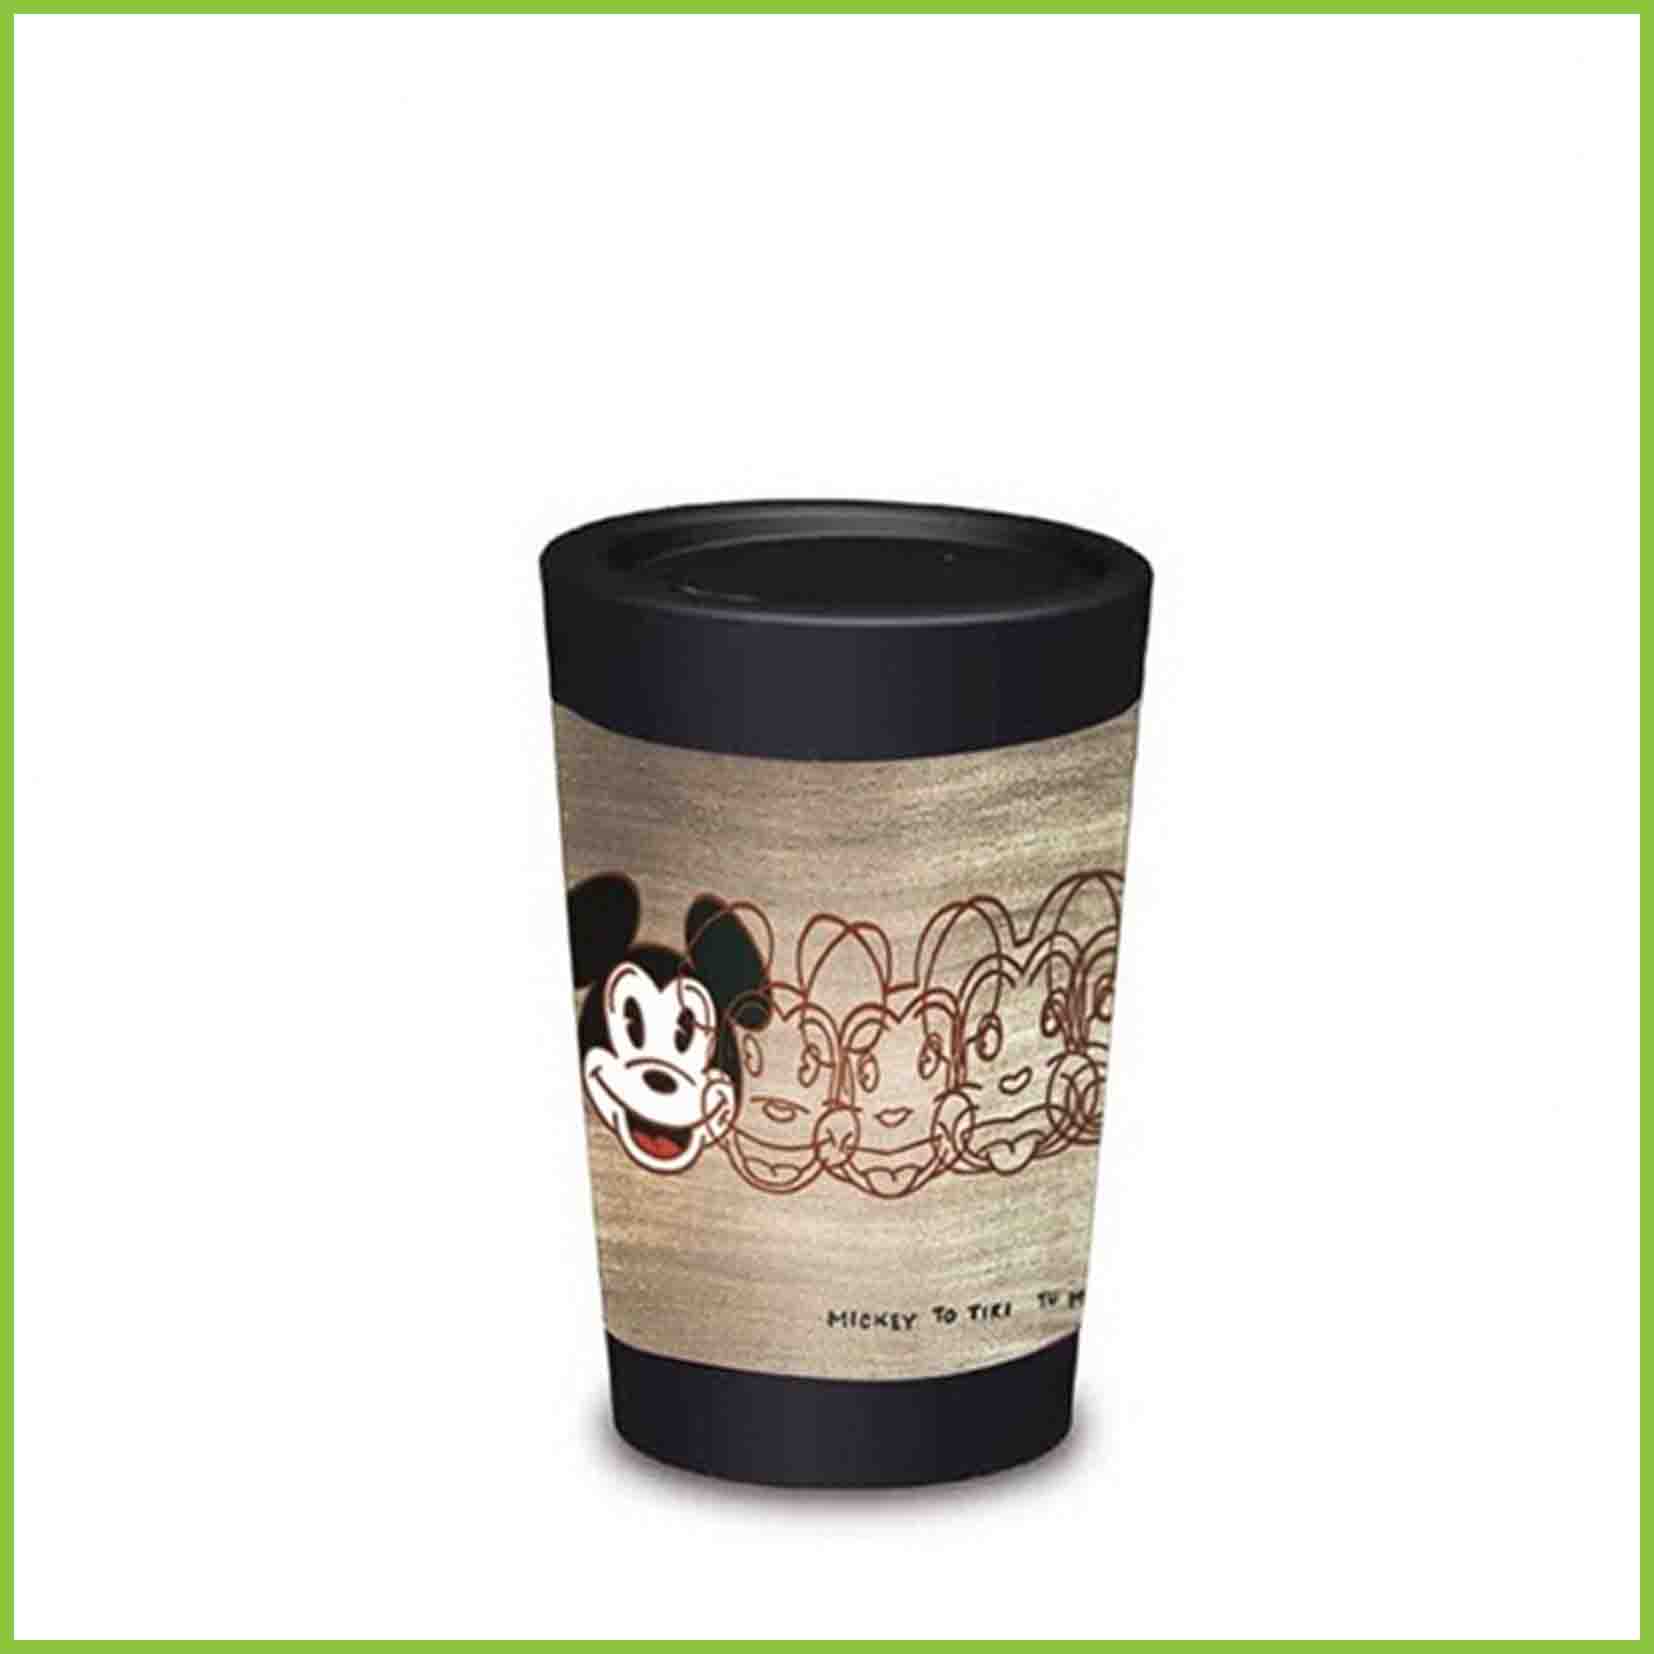 A lightweight reusable cup from CuppaCoffeeCup with a Mickey to Tiki design.